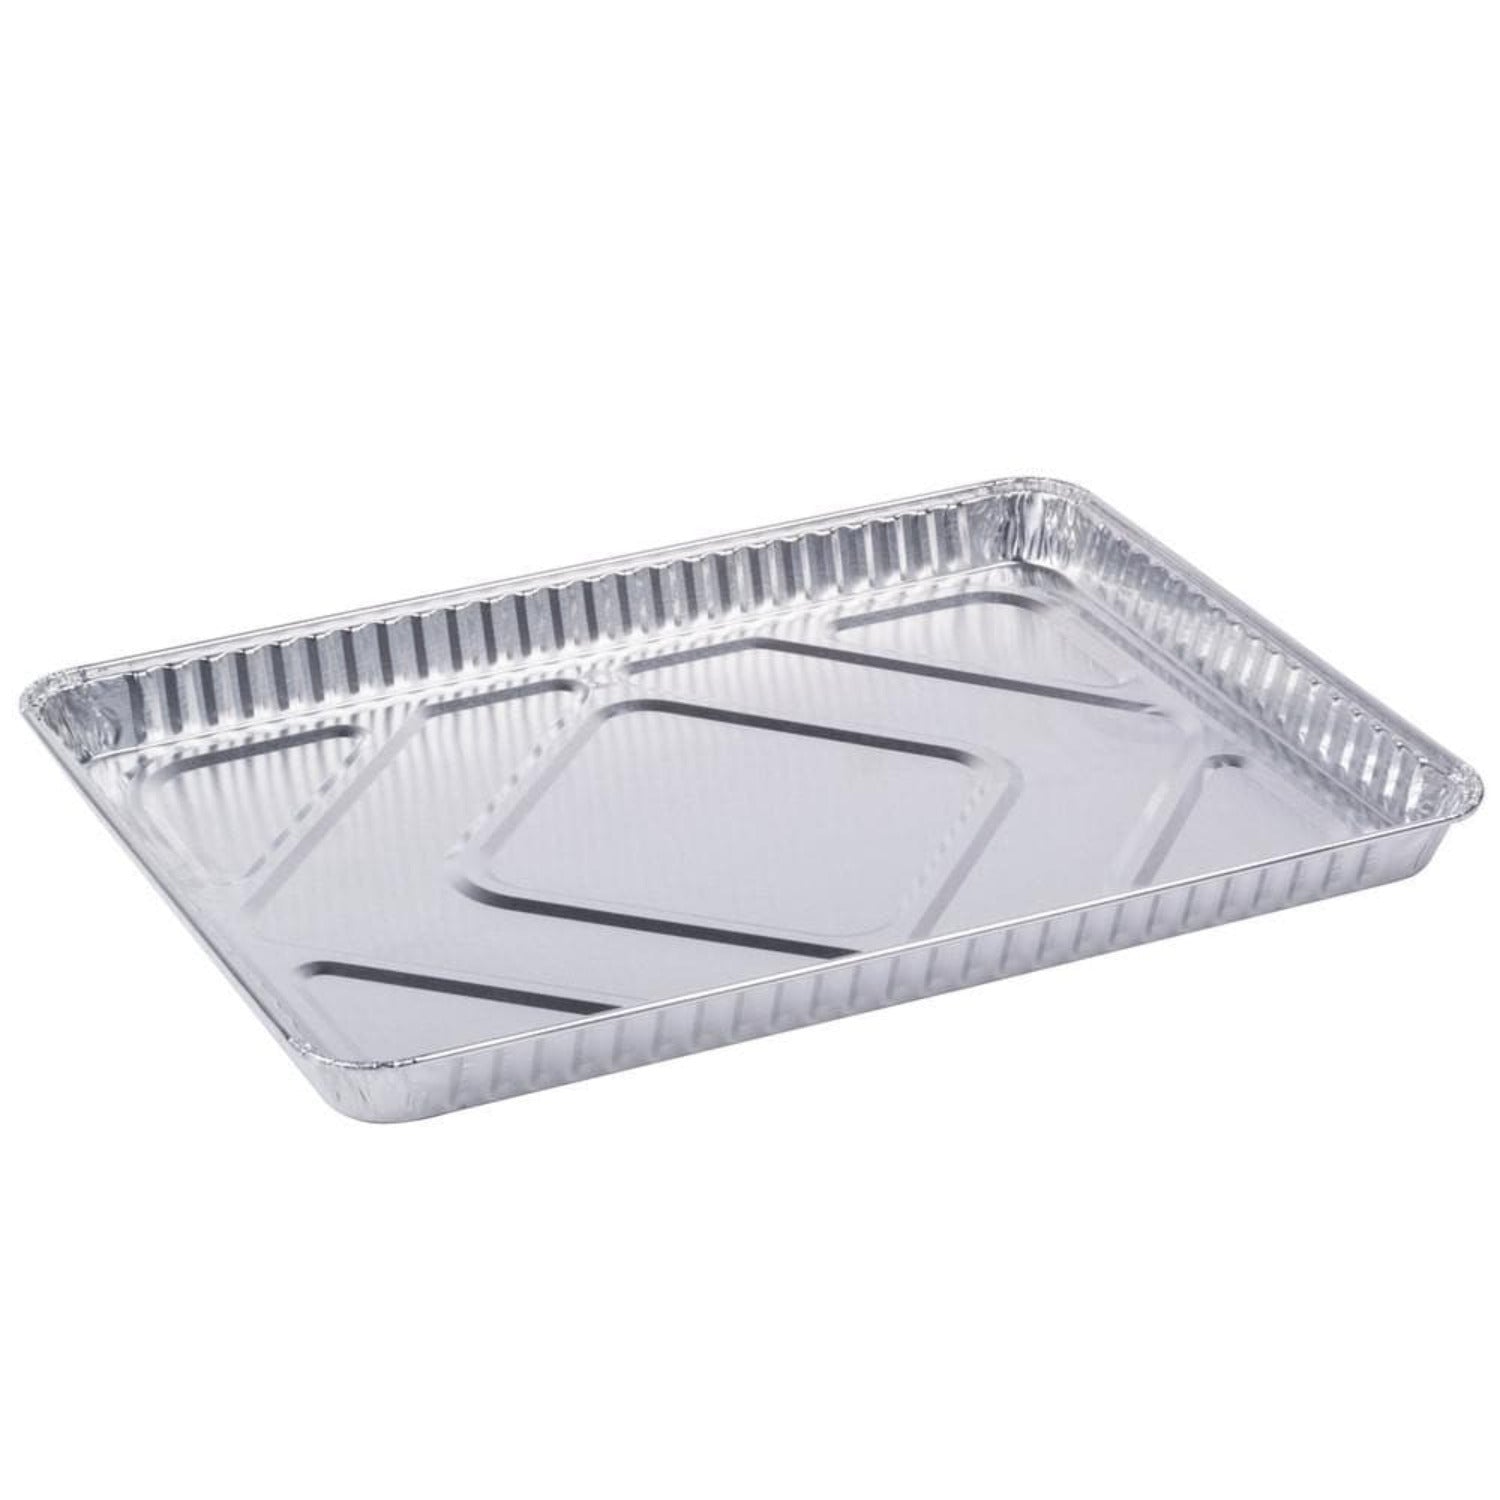 Nicole Home Collection 00625 Aluminum Cookie Sheet Half Size Pack of 100